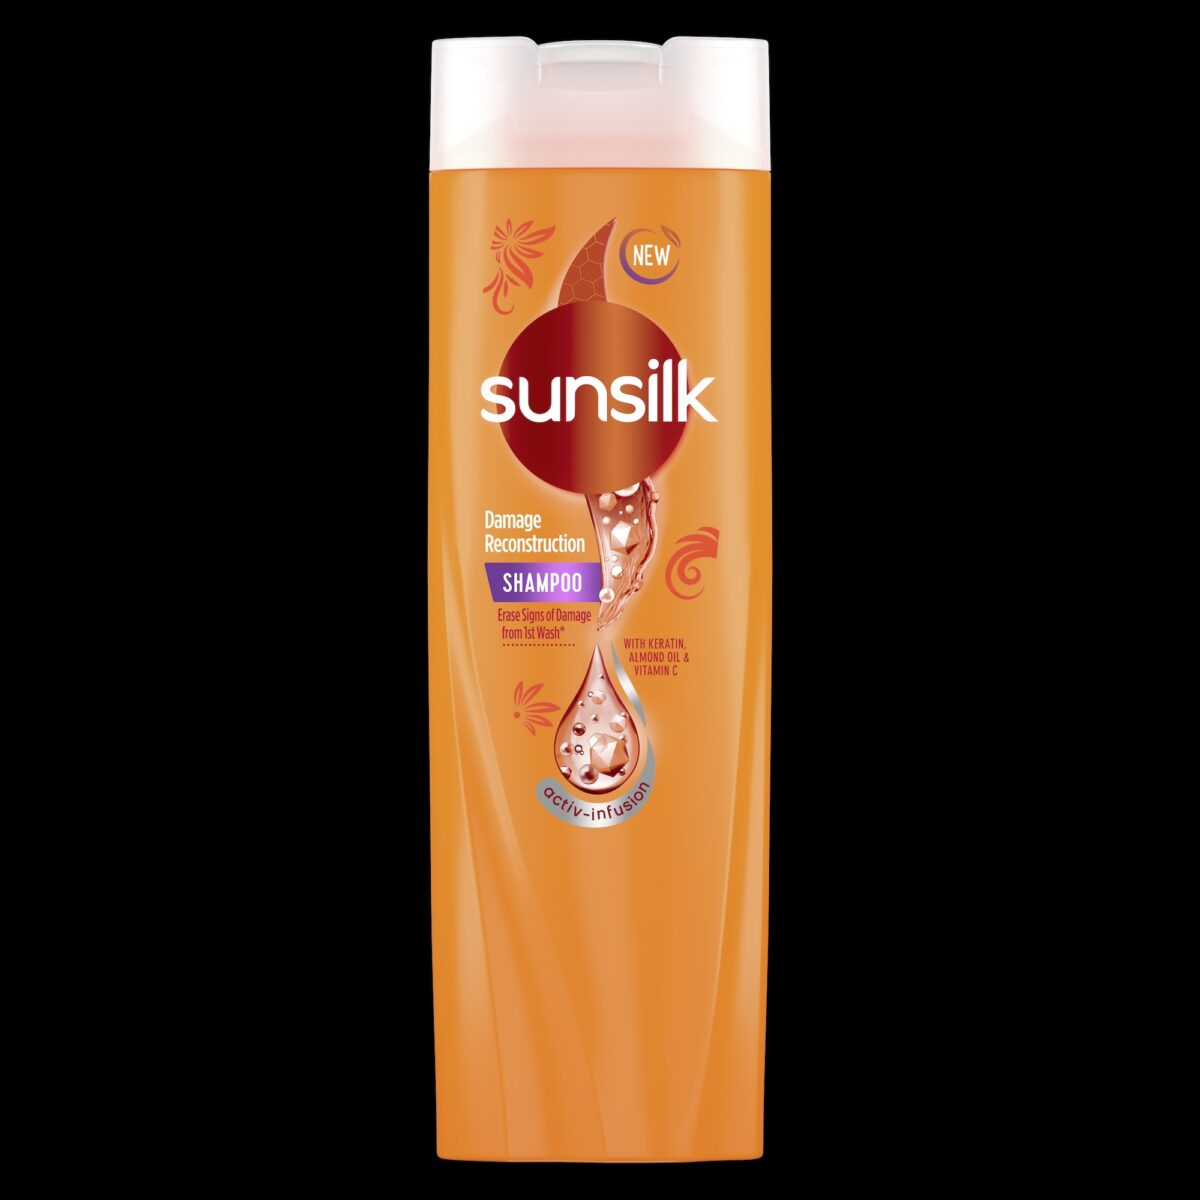 Now with their new best-ever fragrance, Sunsilk with Activ-Infusion is the secret weapon for those who want to conquer the world with confidence and grace